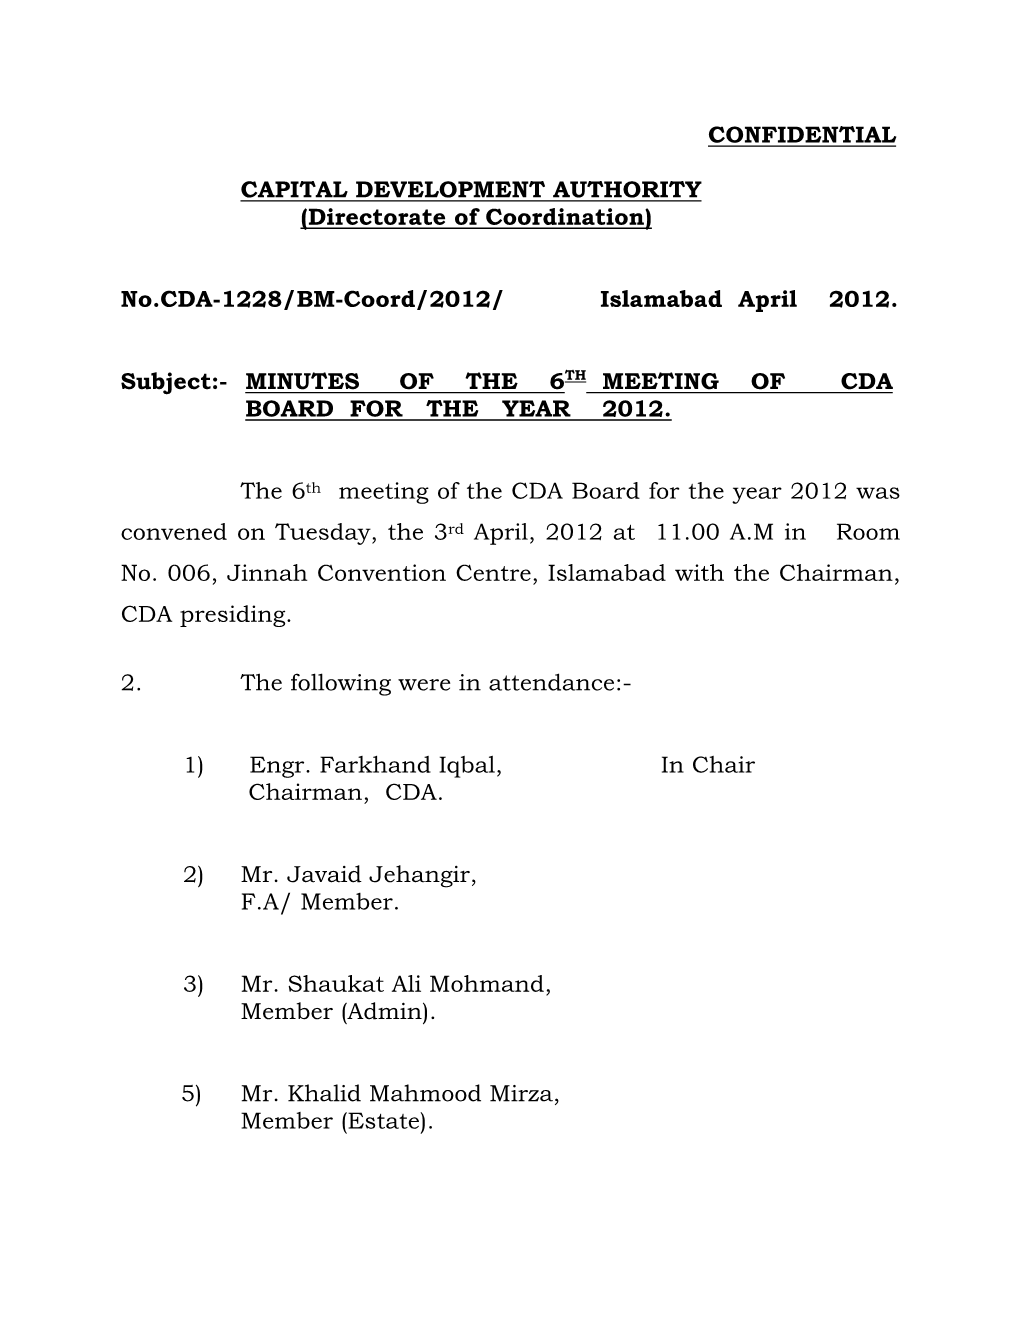 Minutes of the 6Th Meeting of Cda Board for the Year 2012